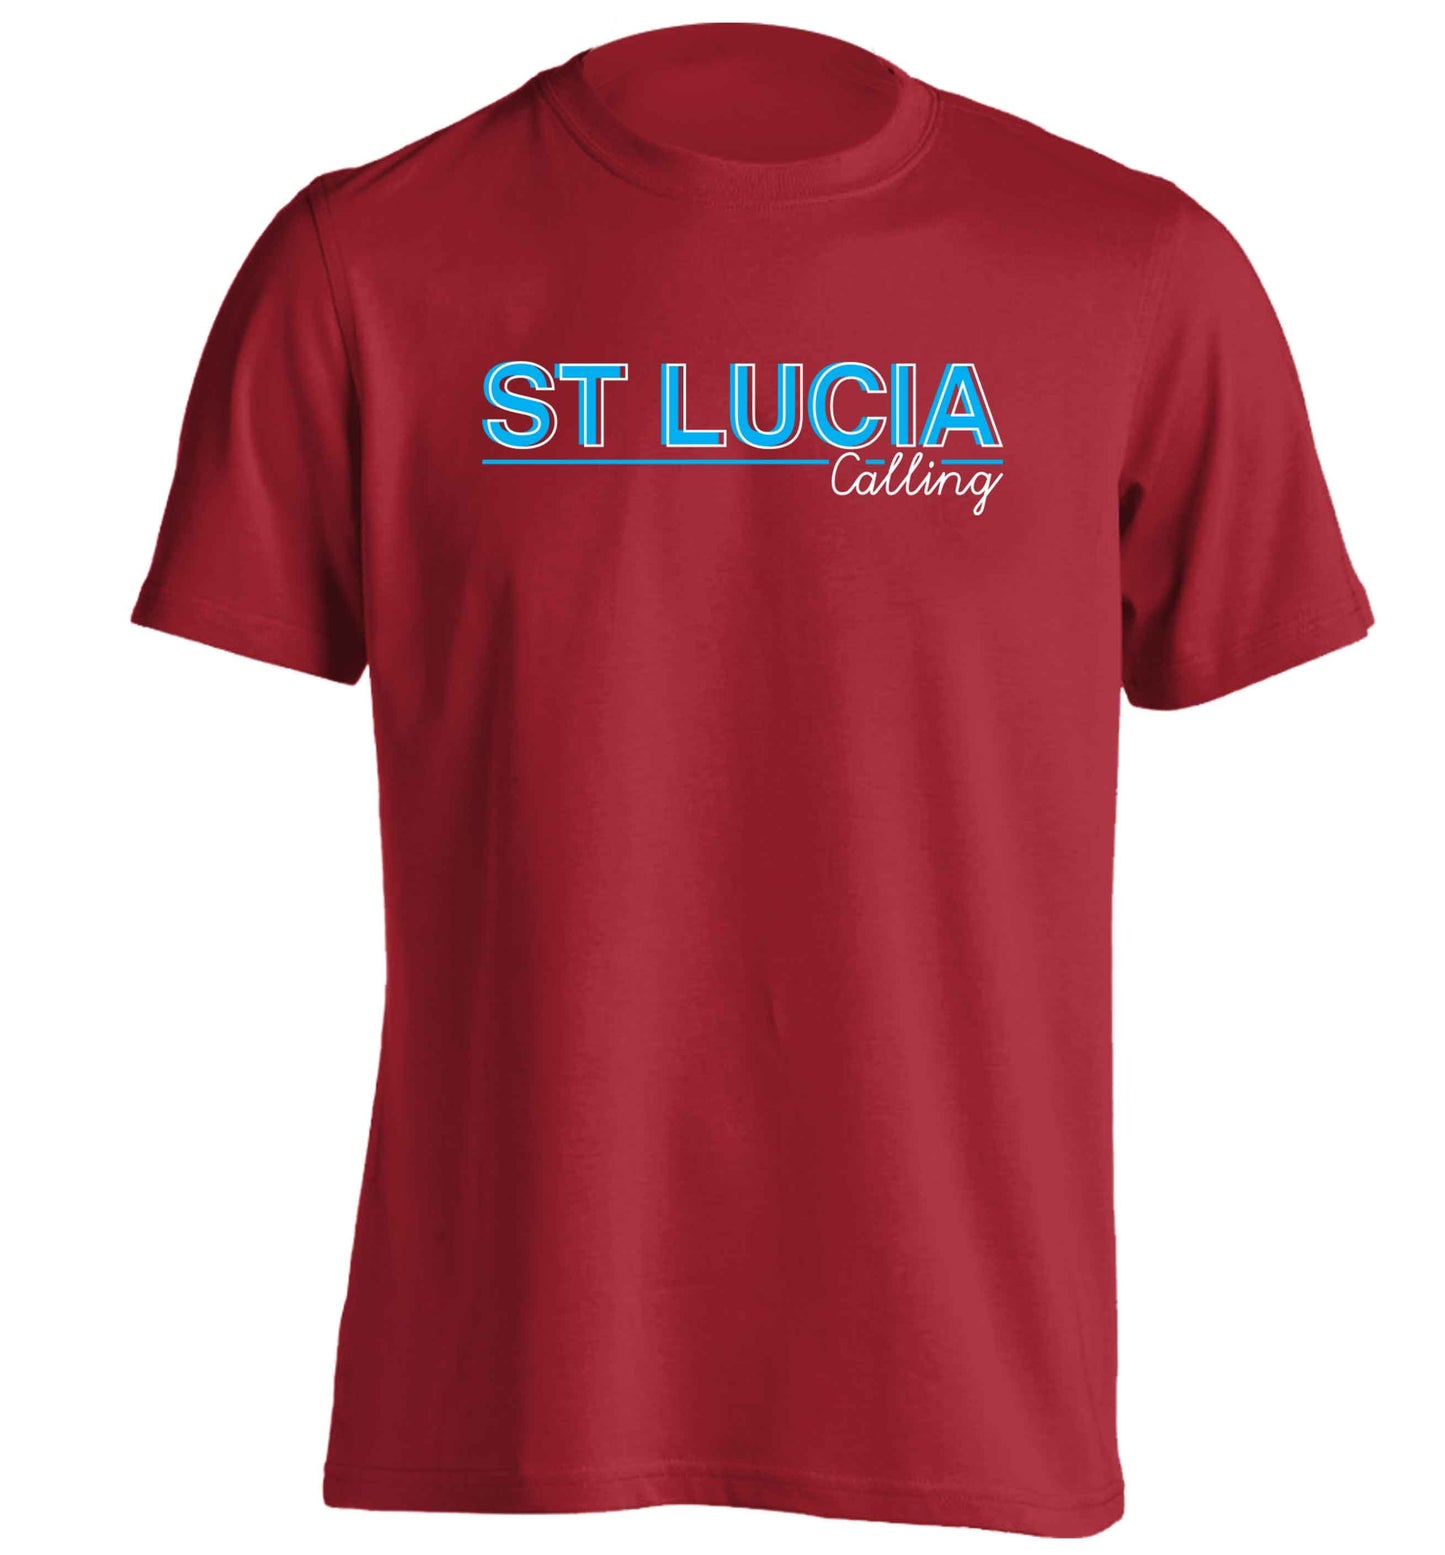 St Lucia calling adults unisex red Tshirt 2XL